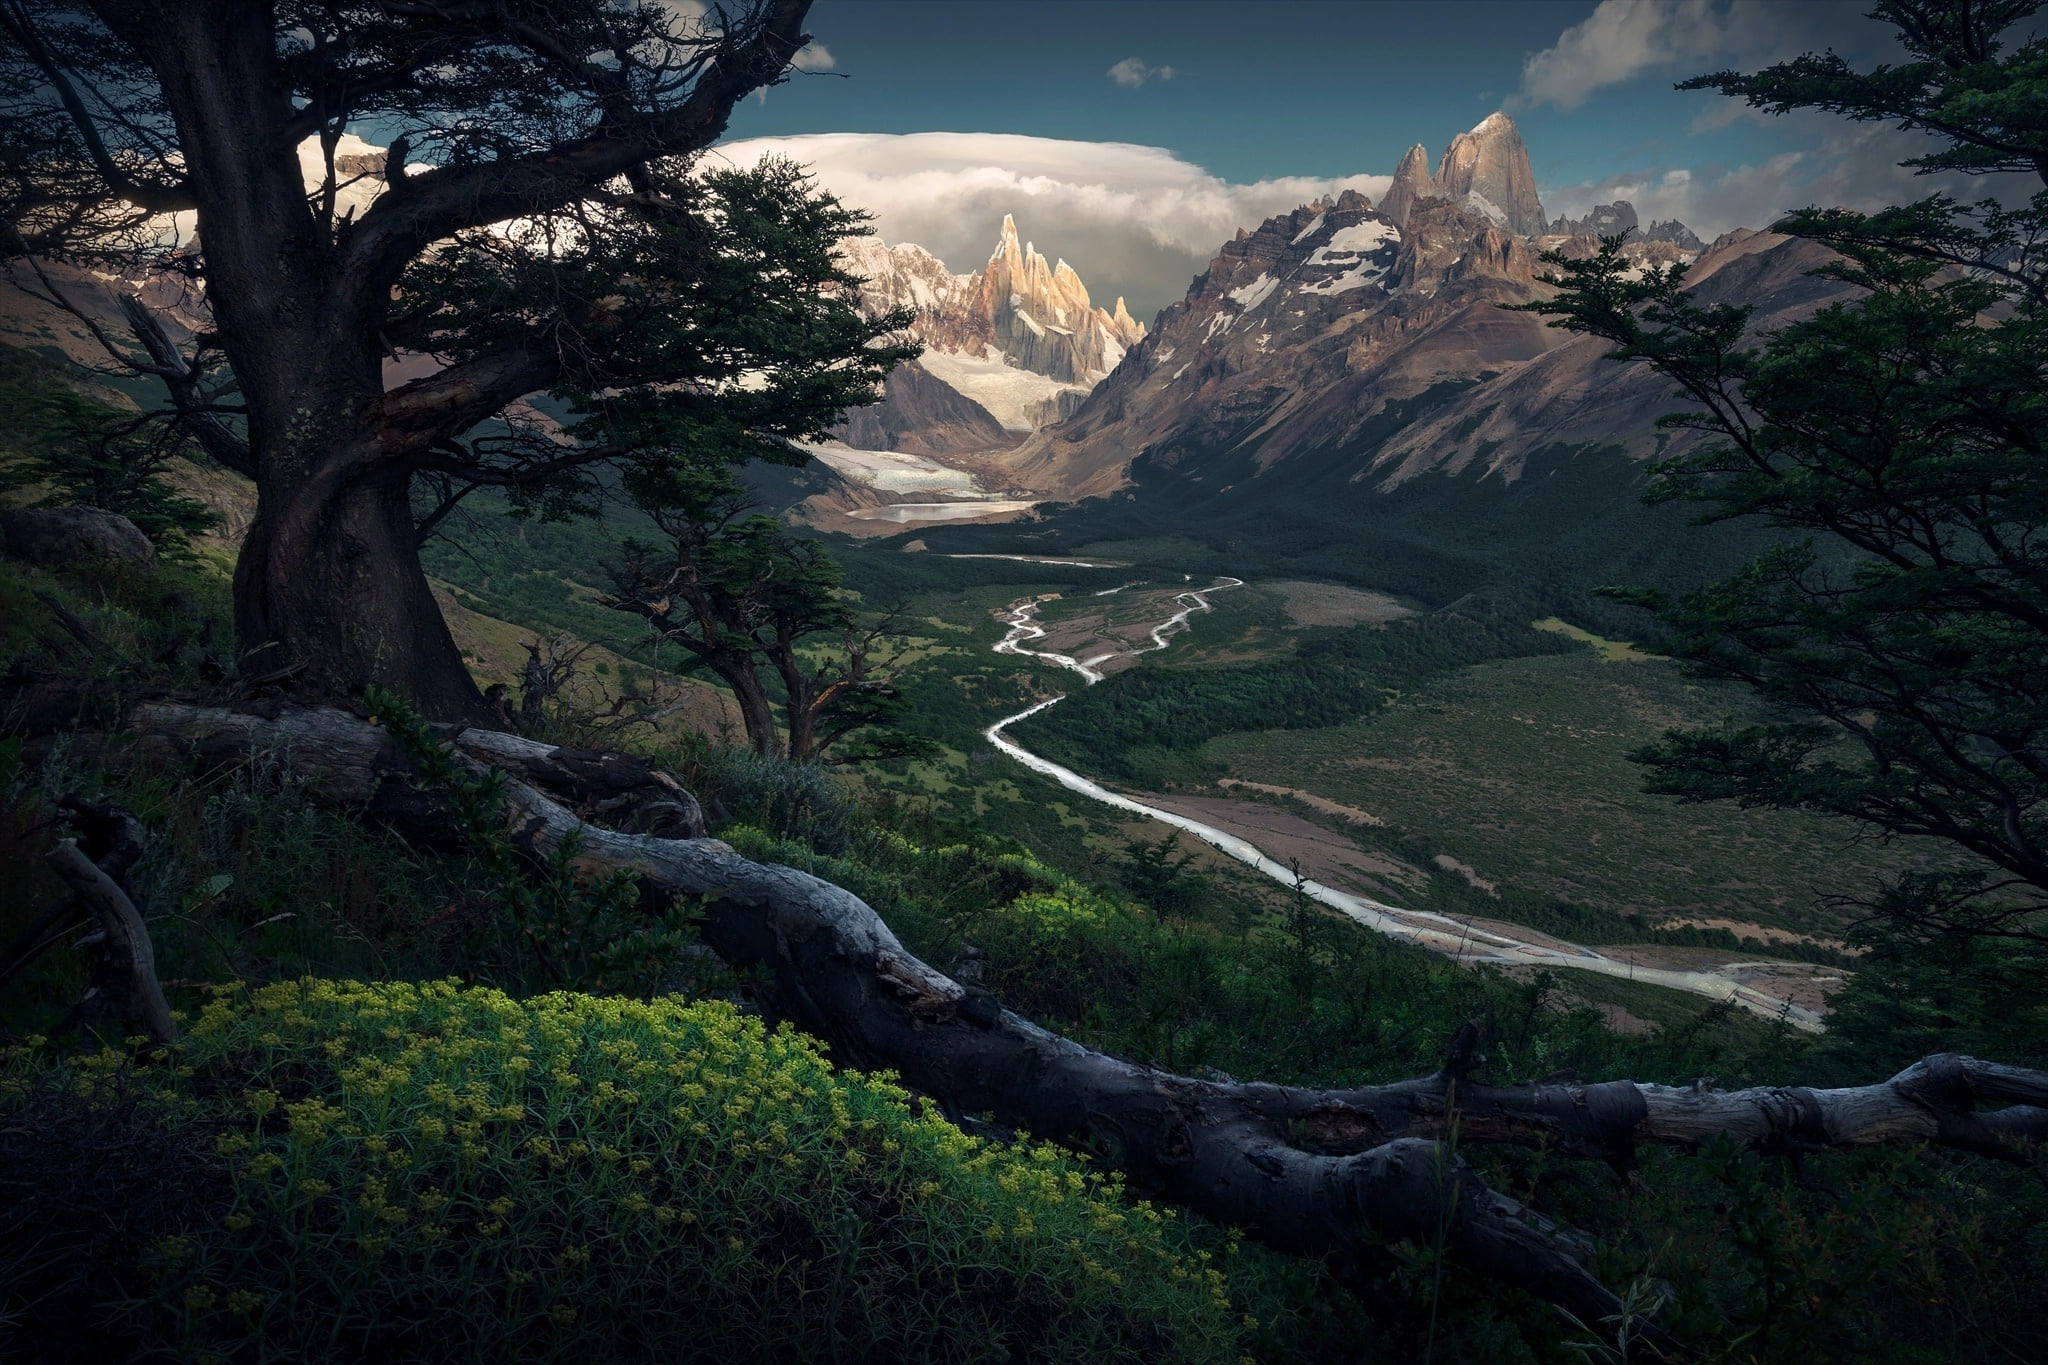 Green Leafed Trees Painting, Nature, Landscape, Dark, - Max Rive Patagonia , HD Wallpaper & Backgrounds